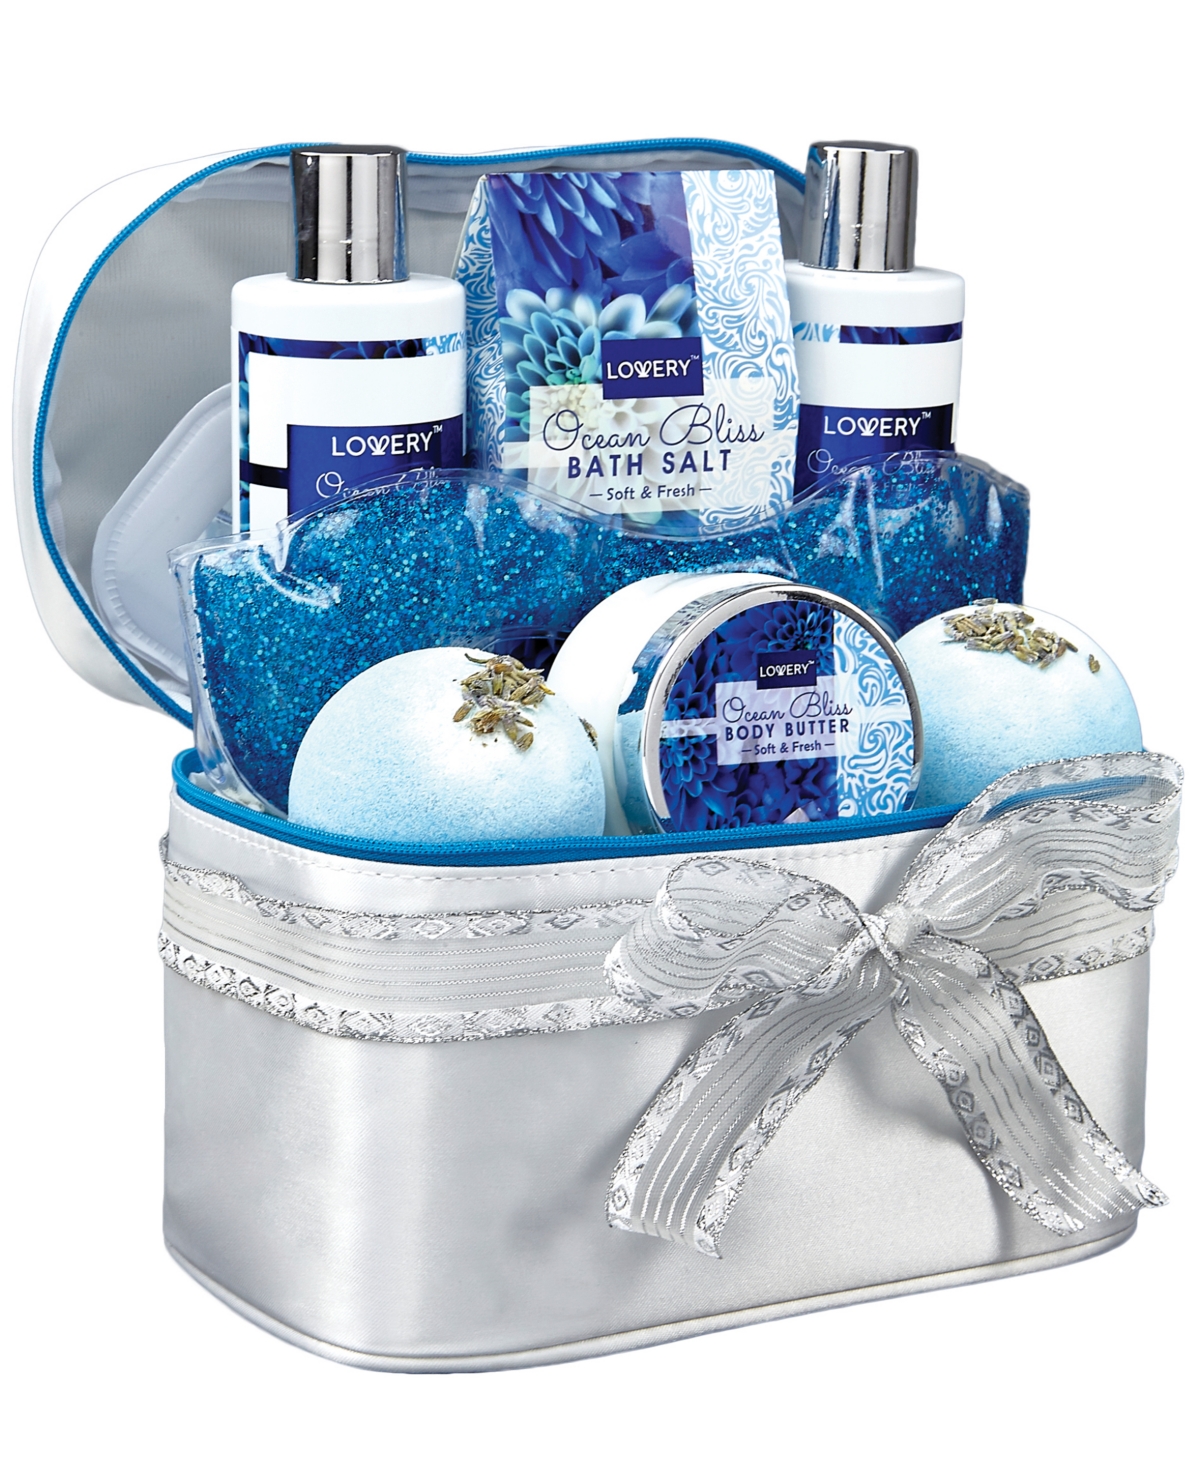 Lovery Ocean Bliss Body Care Gift Set, Bath And Shower Essentials With Cosmetic Bag, 9 Piece